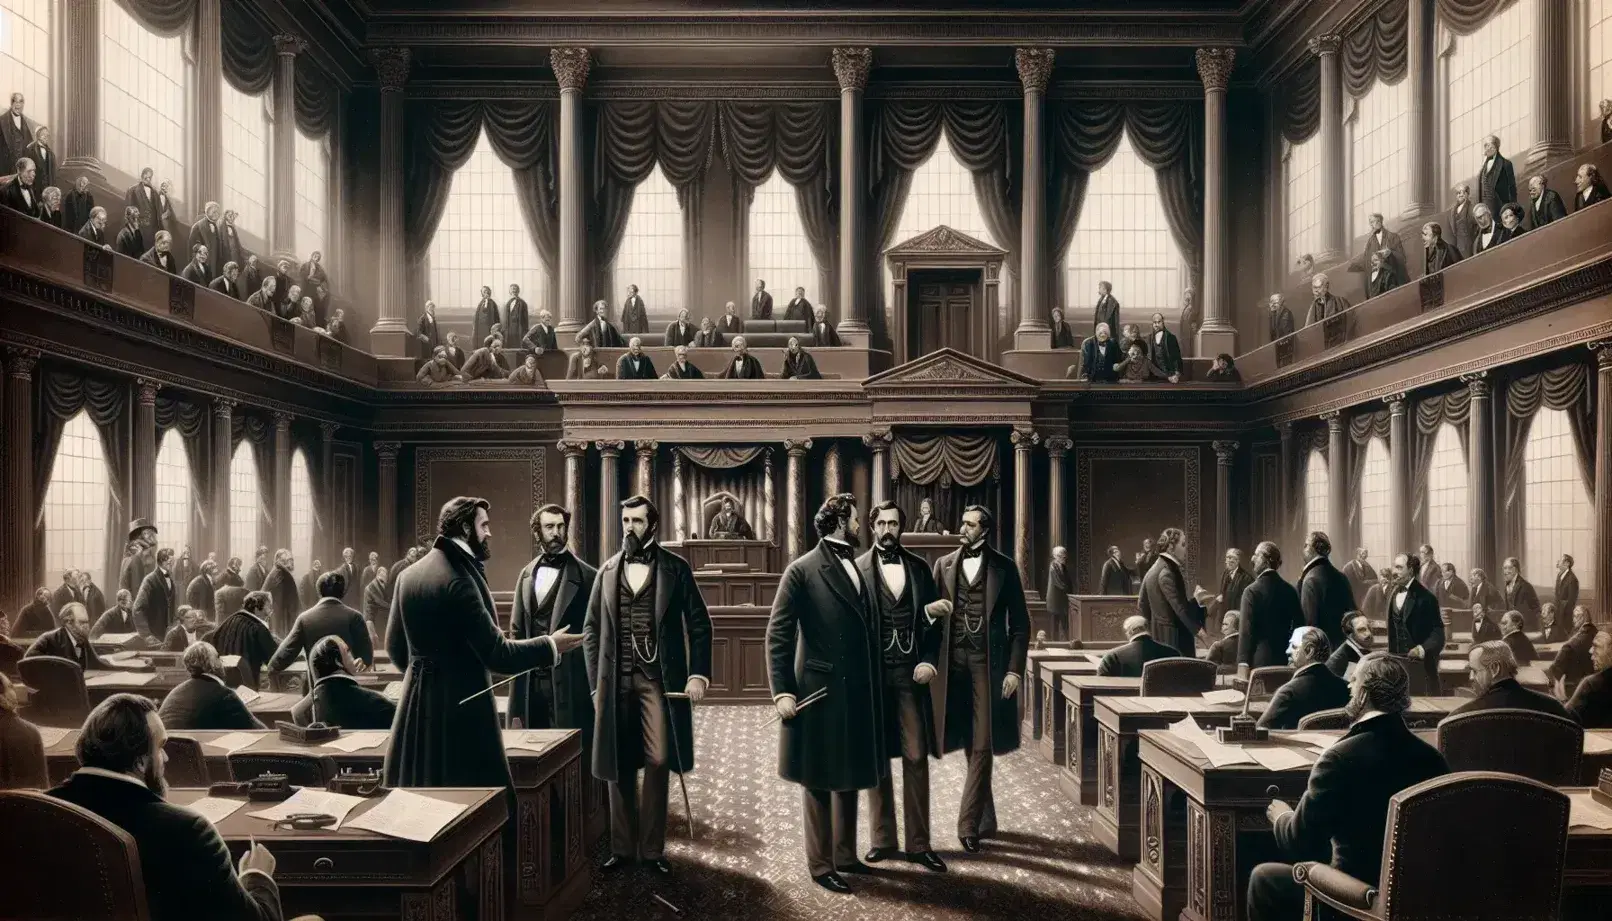 Historical scene in the US House of Representatives in the 1860s, men in period clothing discuss laws, bright environment.